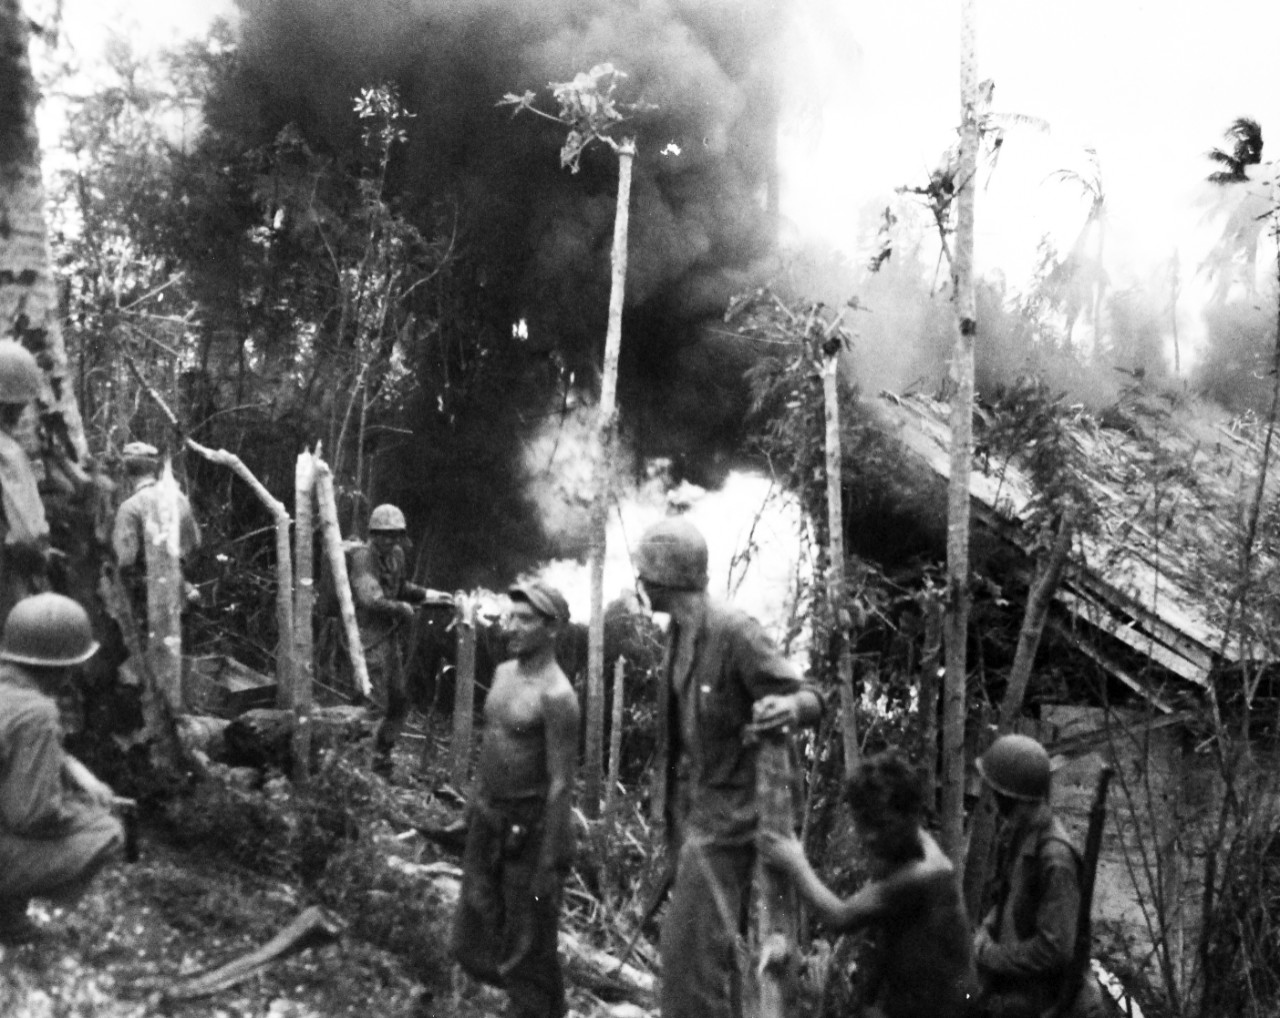 80-G-239424:  Invasion of Guam, July 21-August 10, 1944.   U.S. Marines turned away from the intense heat, when they used a flame thrower to drive the enemy from a building on Guam.  The Japanese – who lived – dashed out a rear door and were shot down by other Marines using automatic rifles, released August 3, 1944.    Official U.S. Navy Photograph, now in the collections of the National Archives.  (2017/03/07).